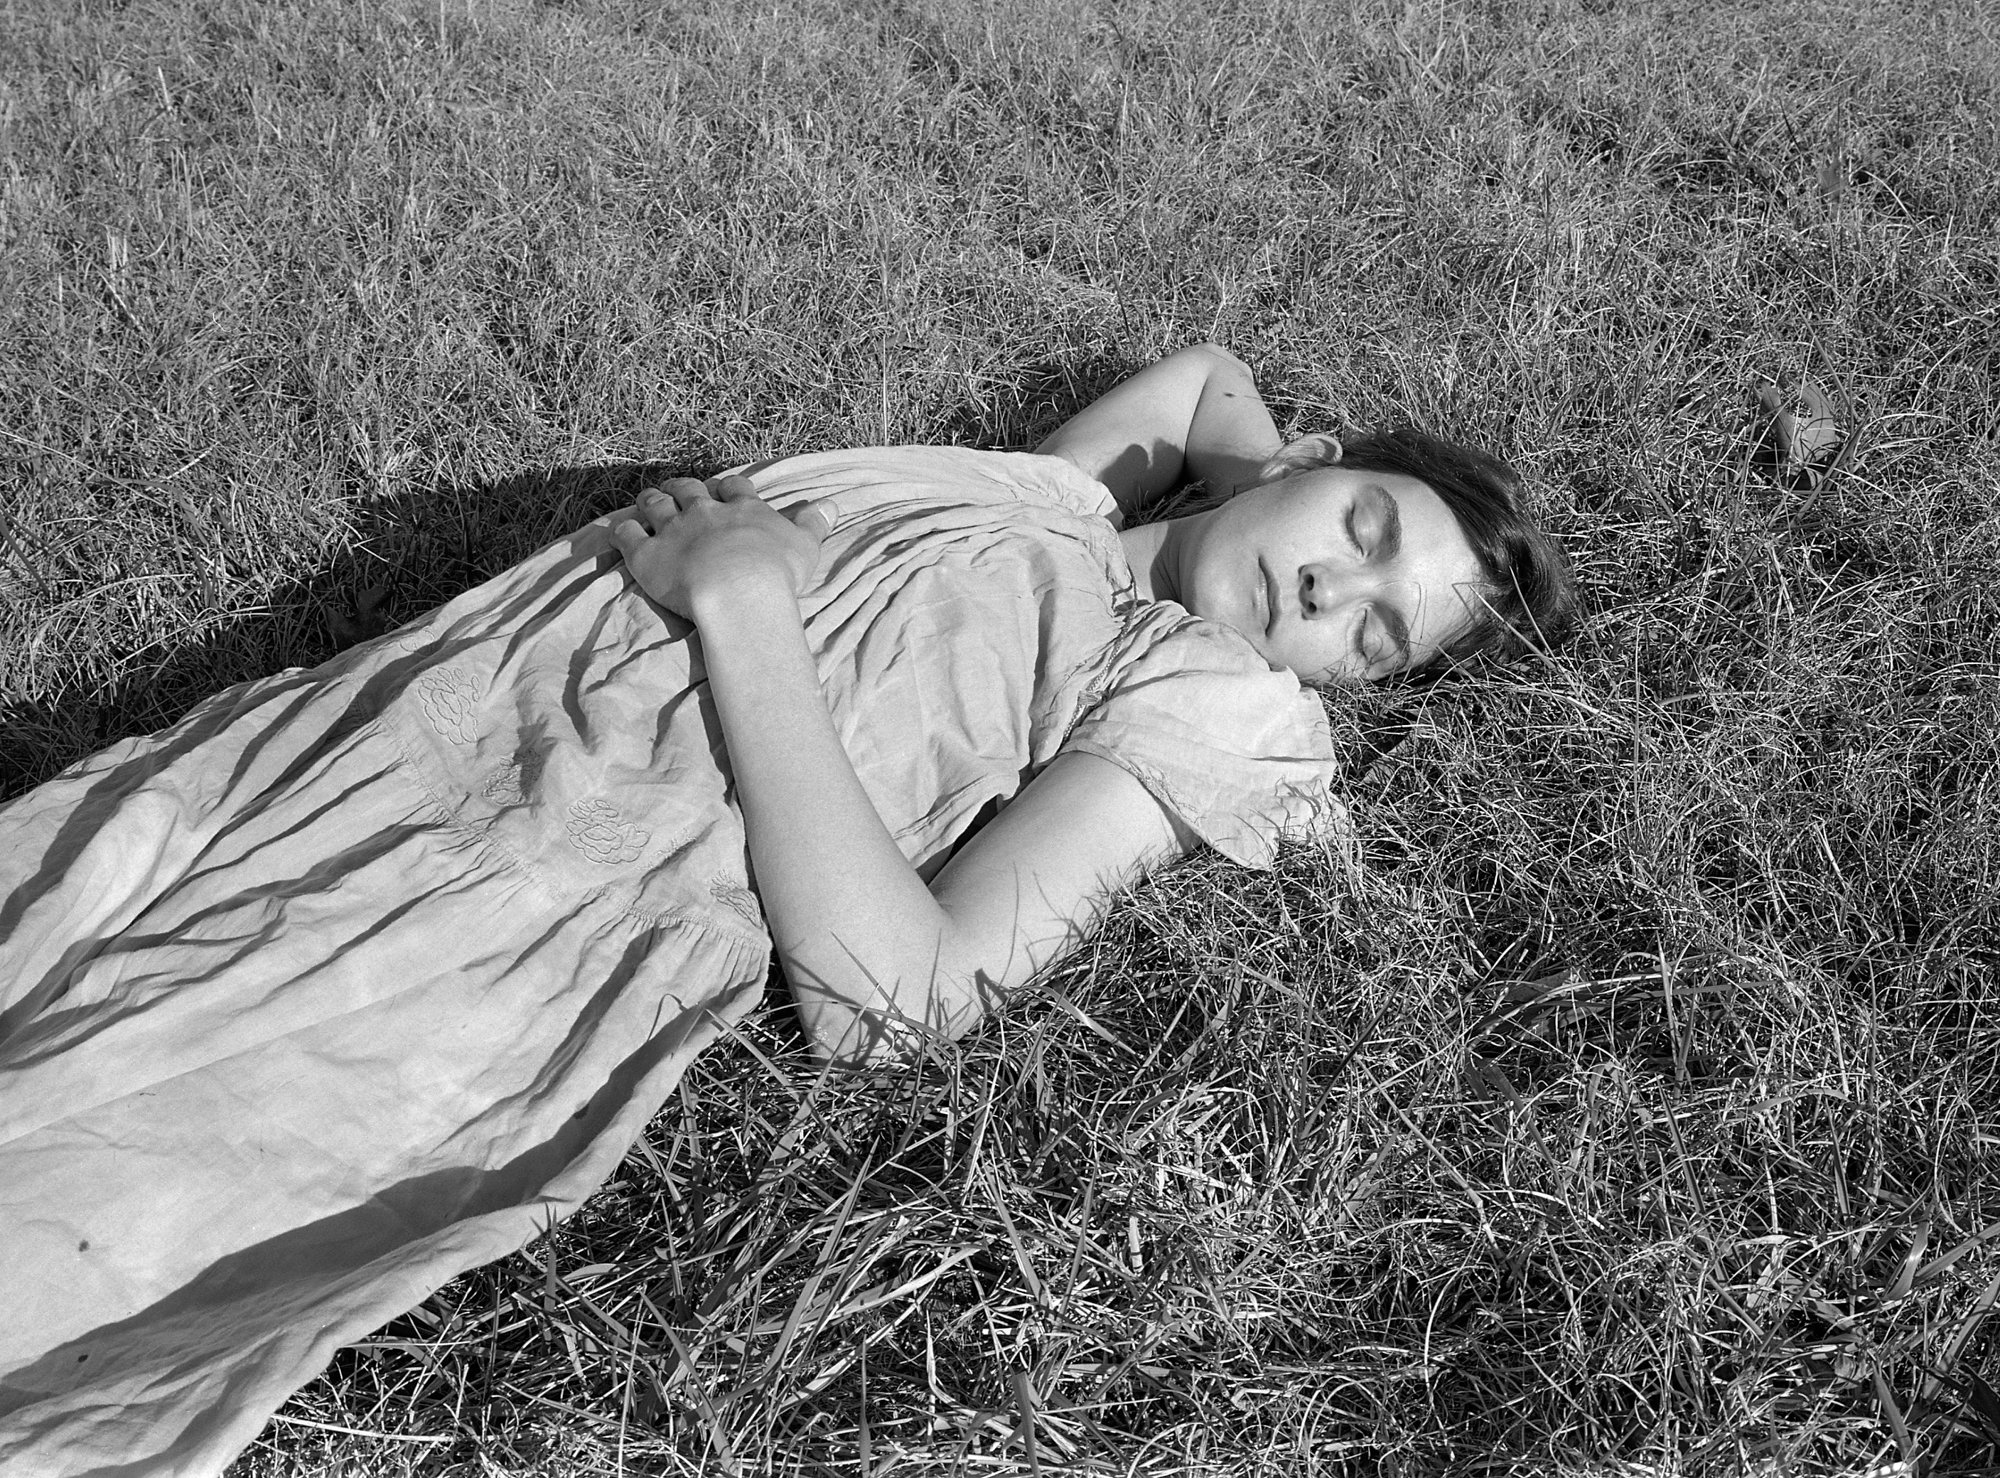 A woman with light skin, in a wrinkly linen dress lying in the grass, eyes closed, one hand over her belly and the other under her head.